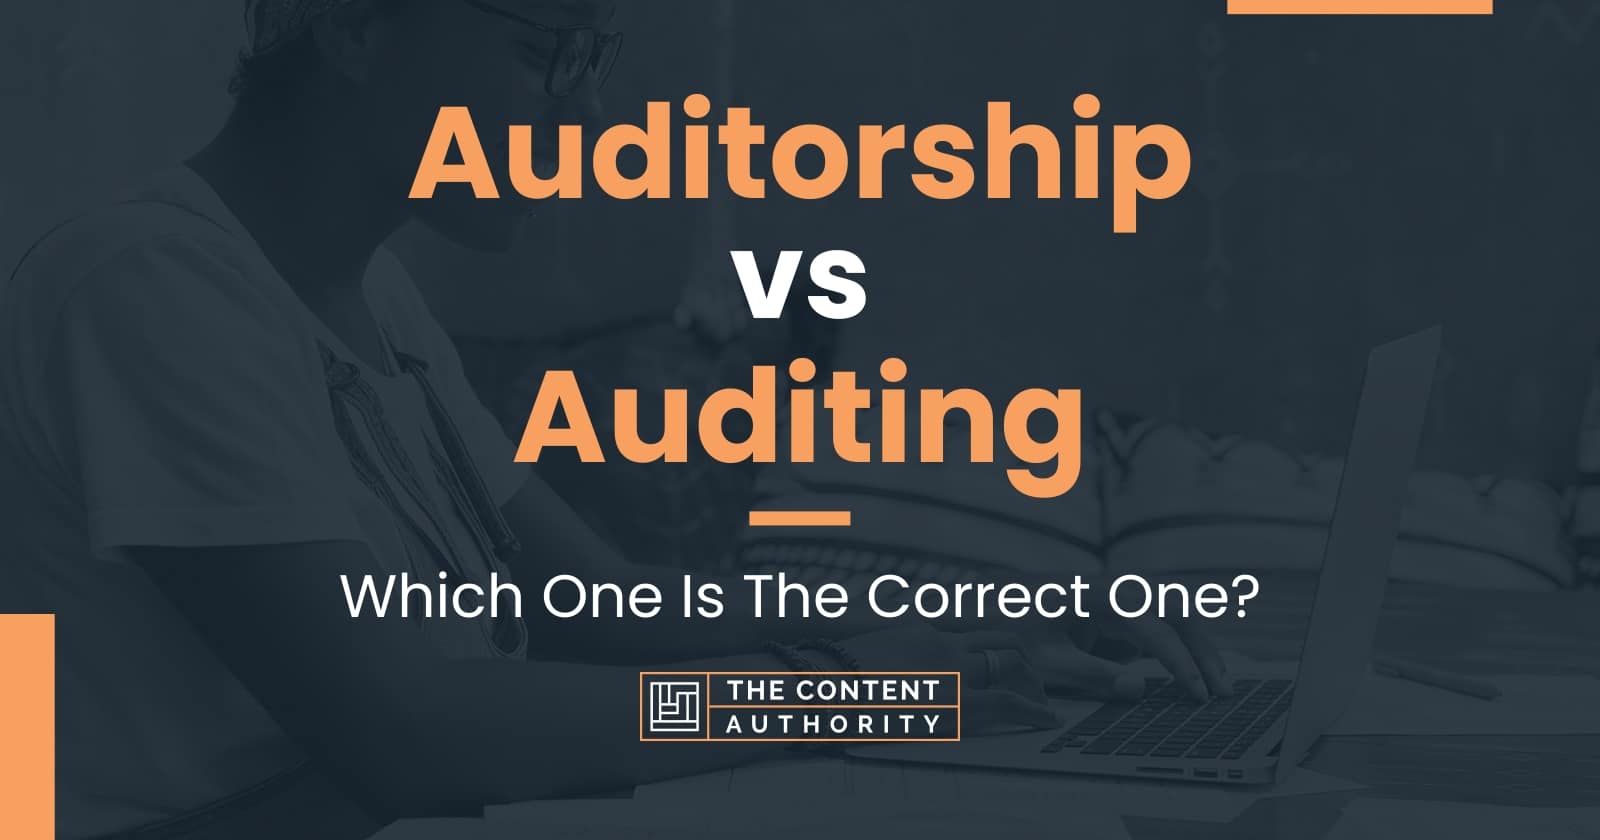 Auditorship vs Auditing: Which One Is The Correct One?